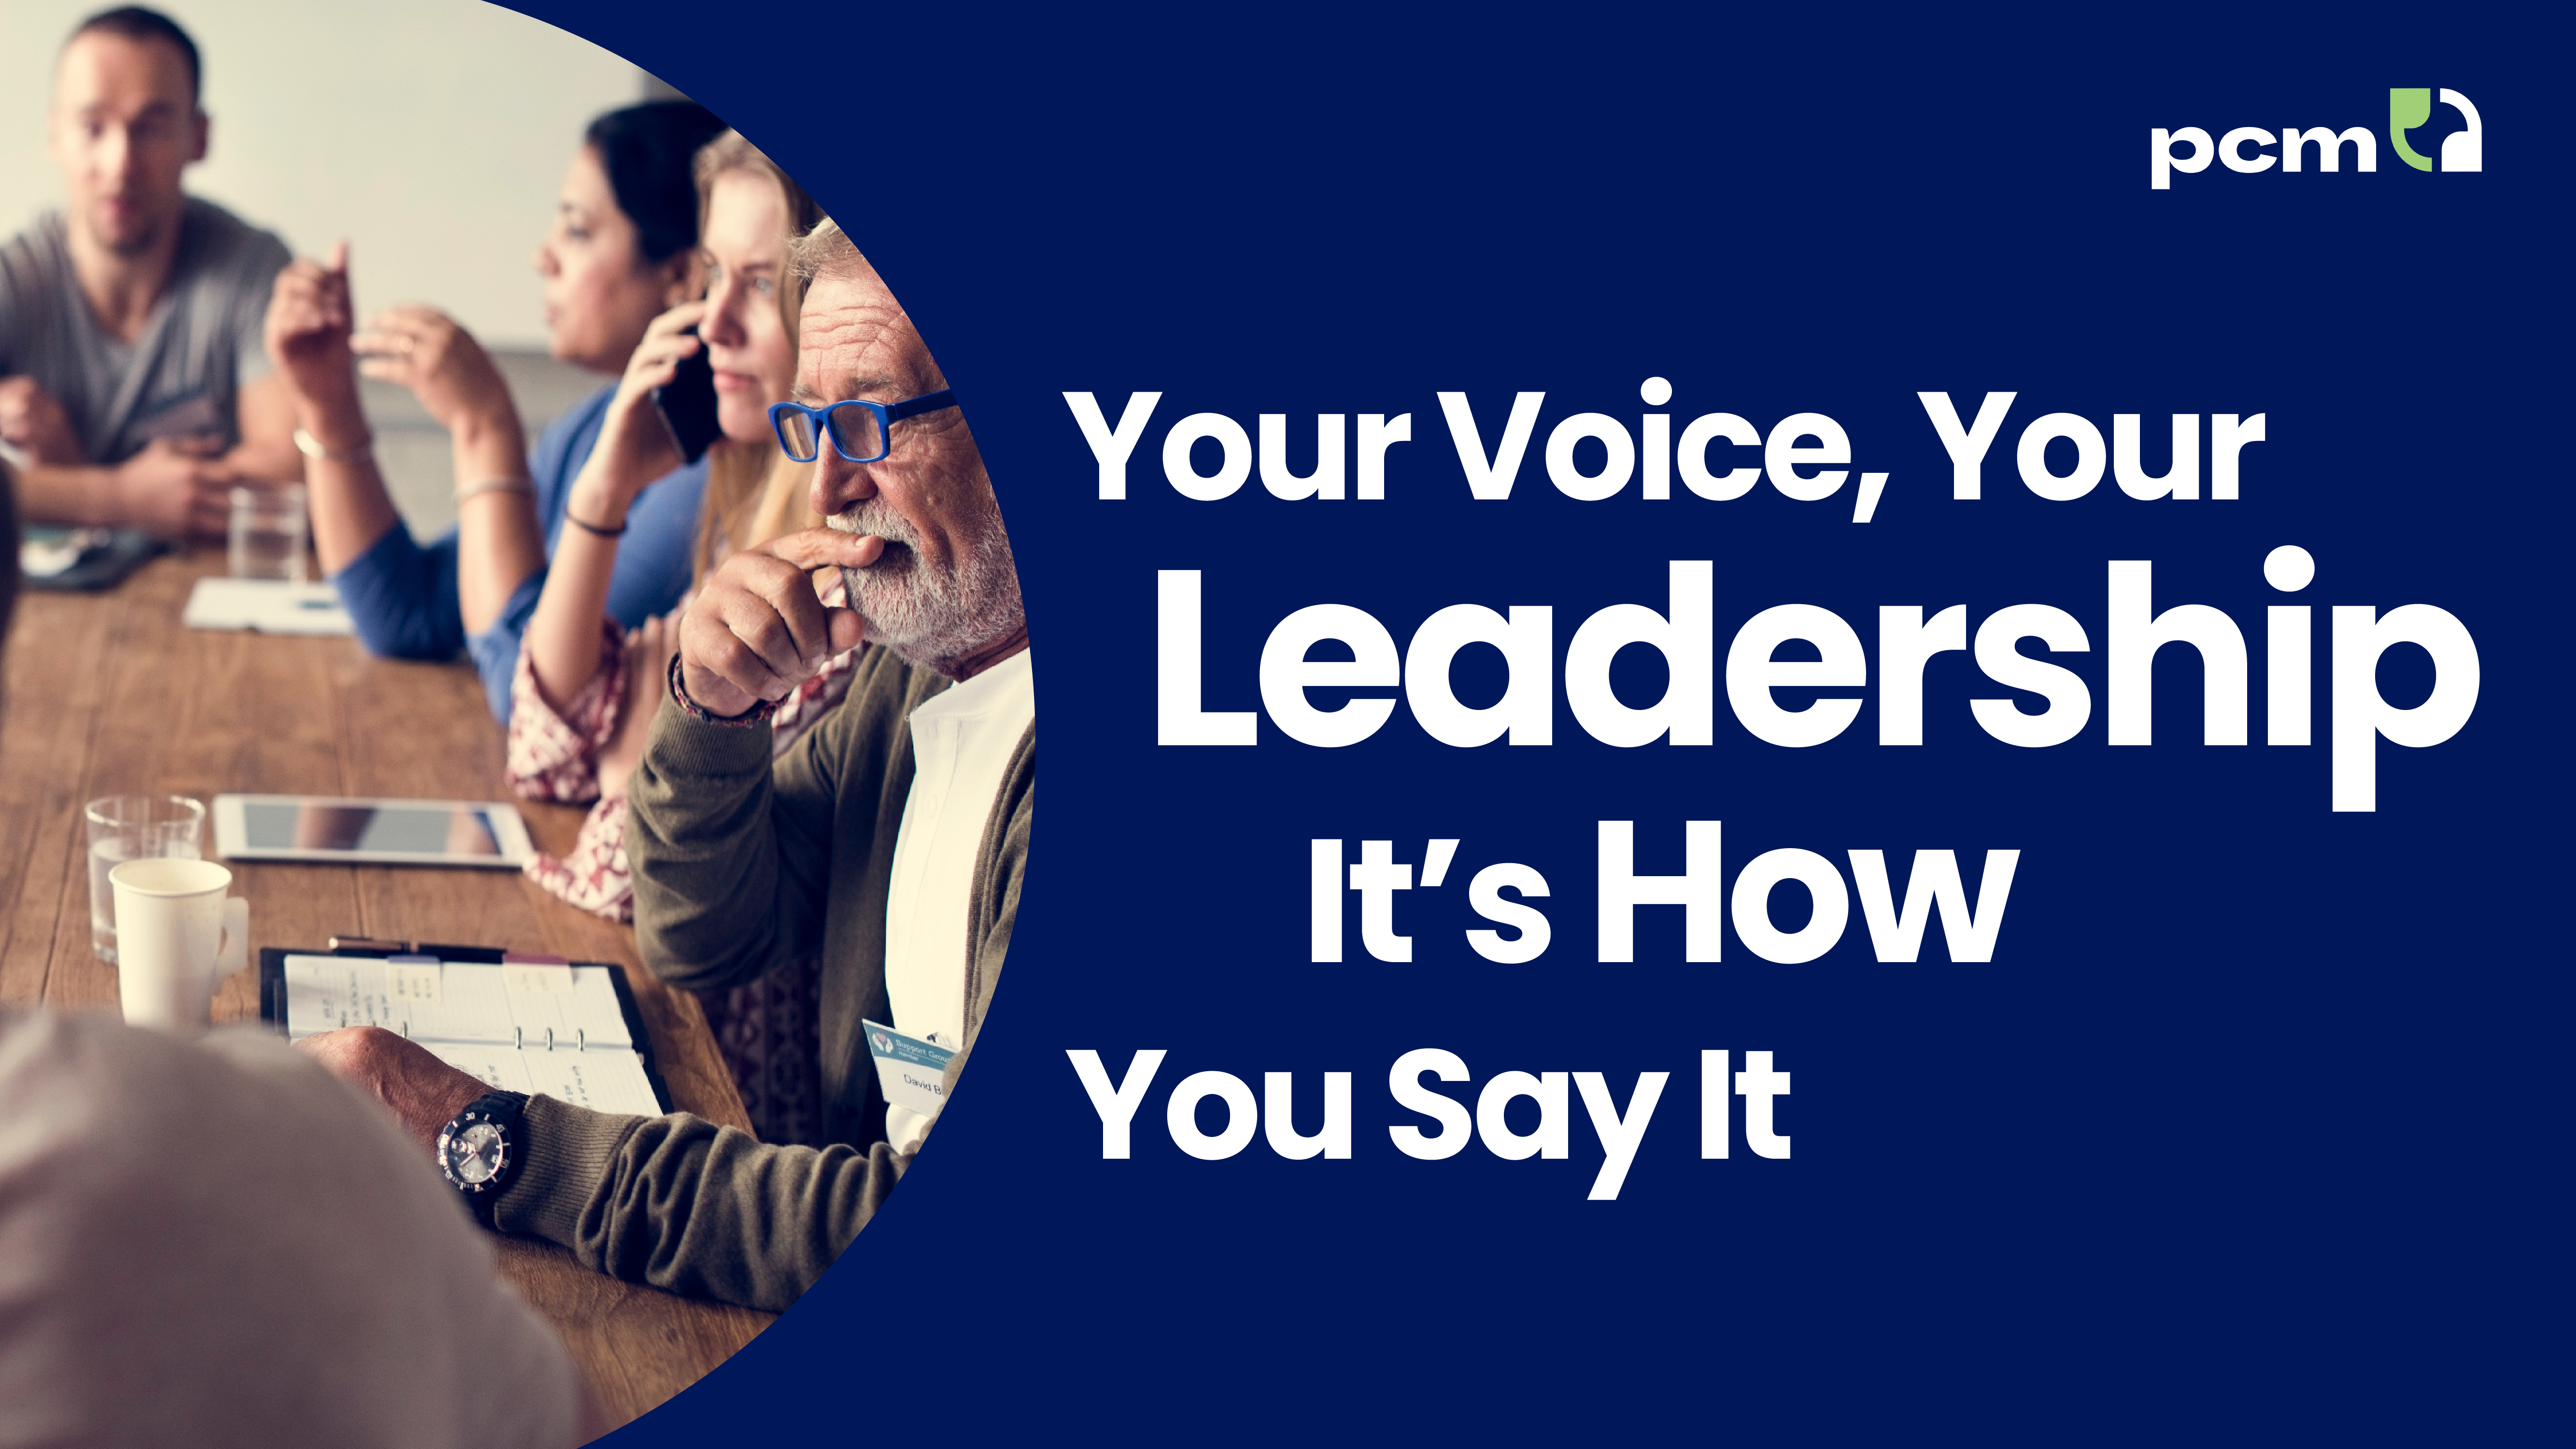 Your voice, your leadership